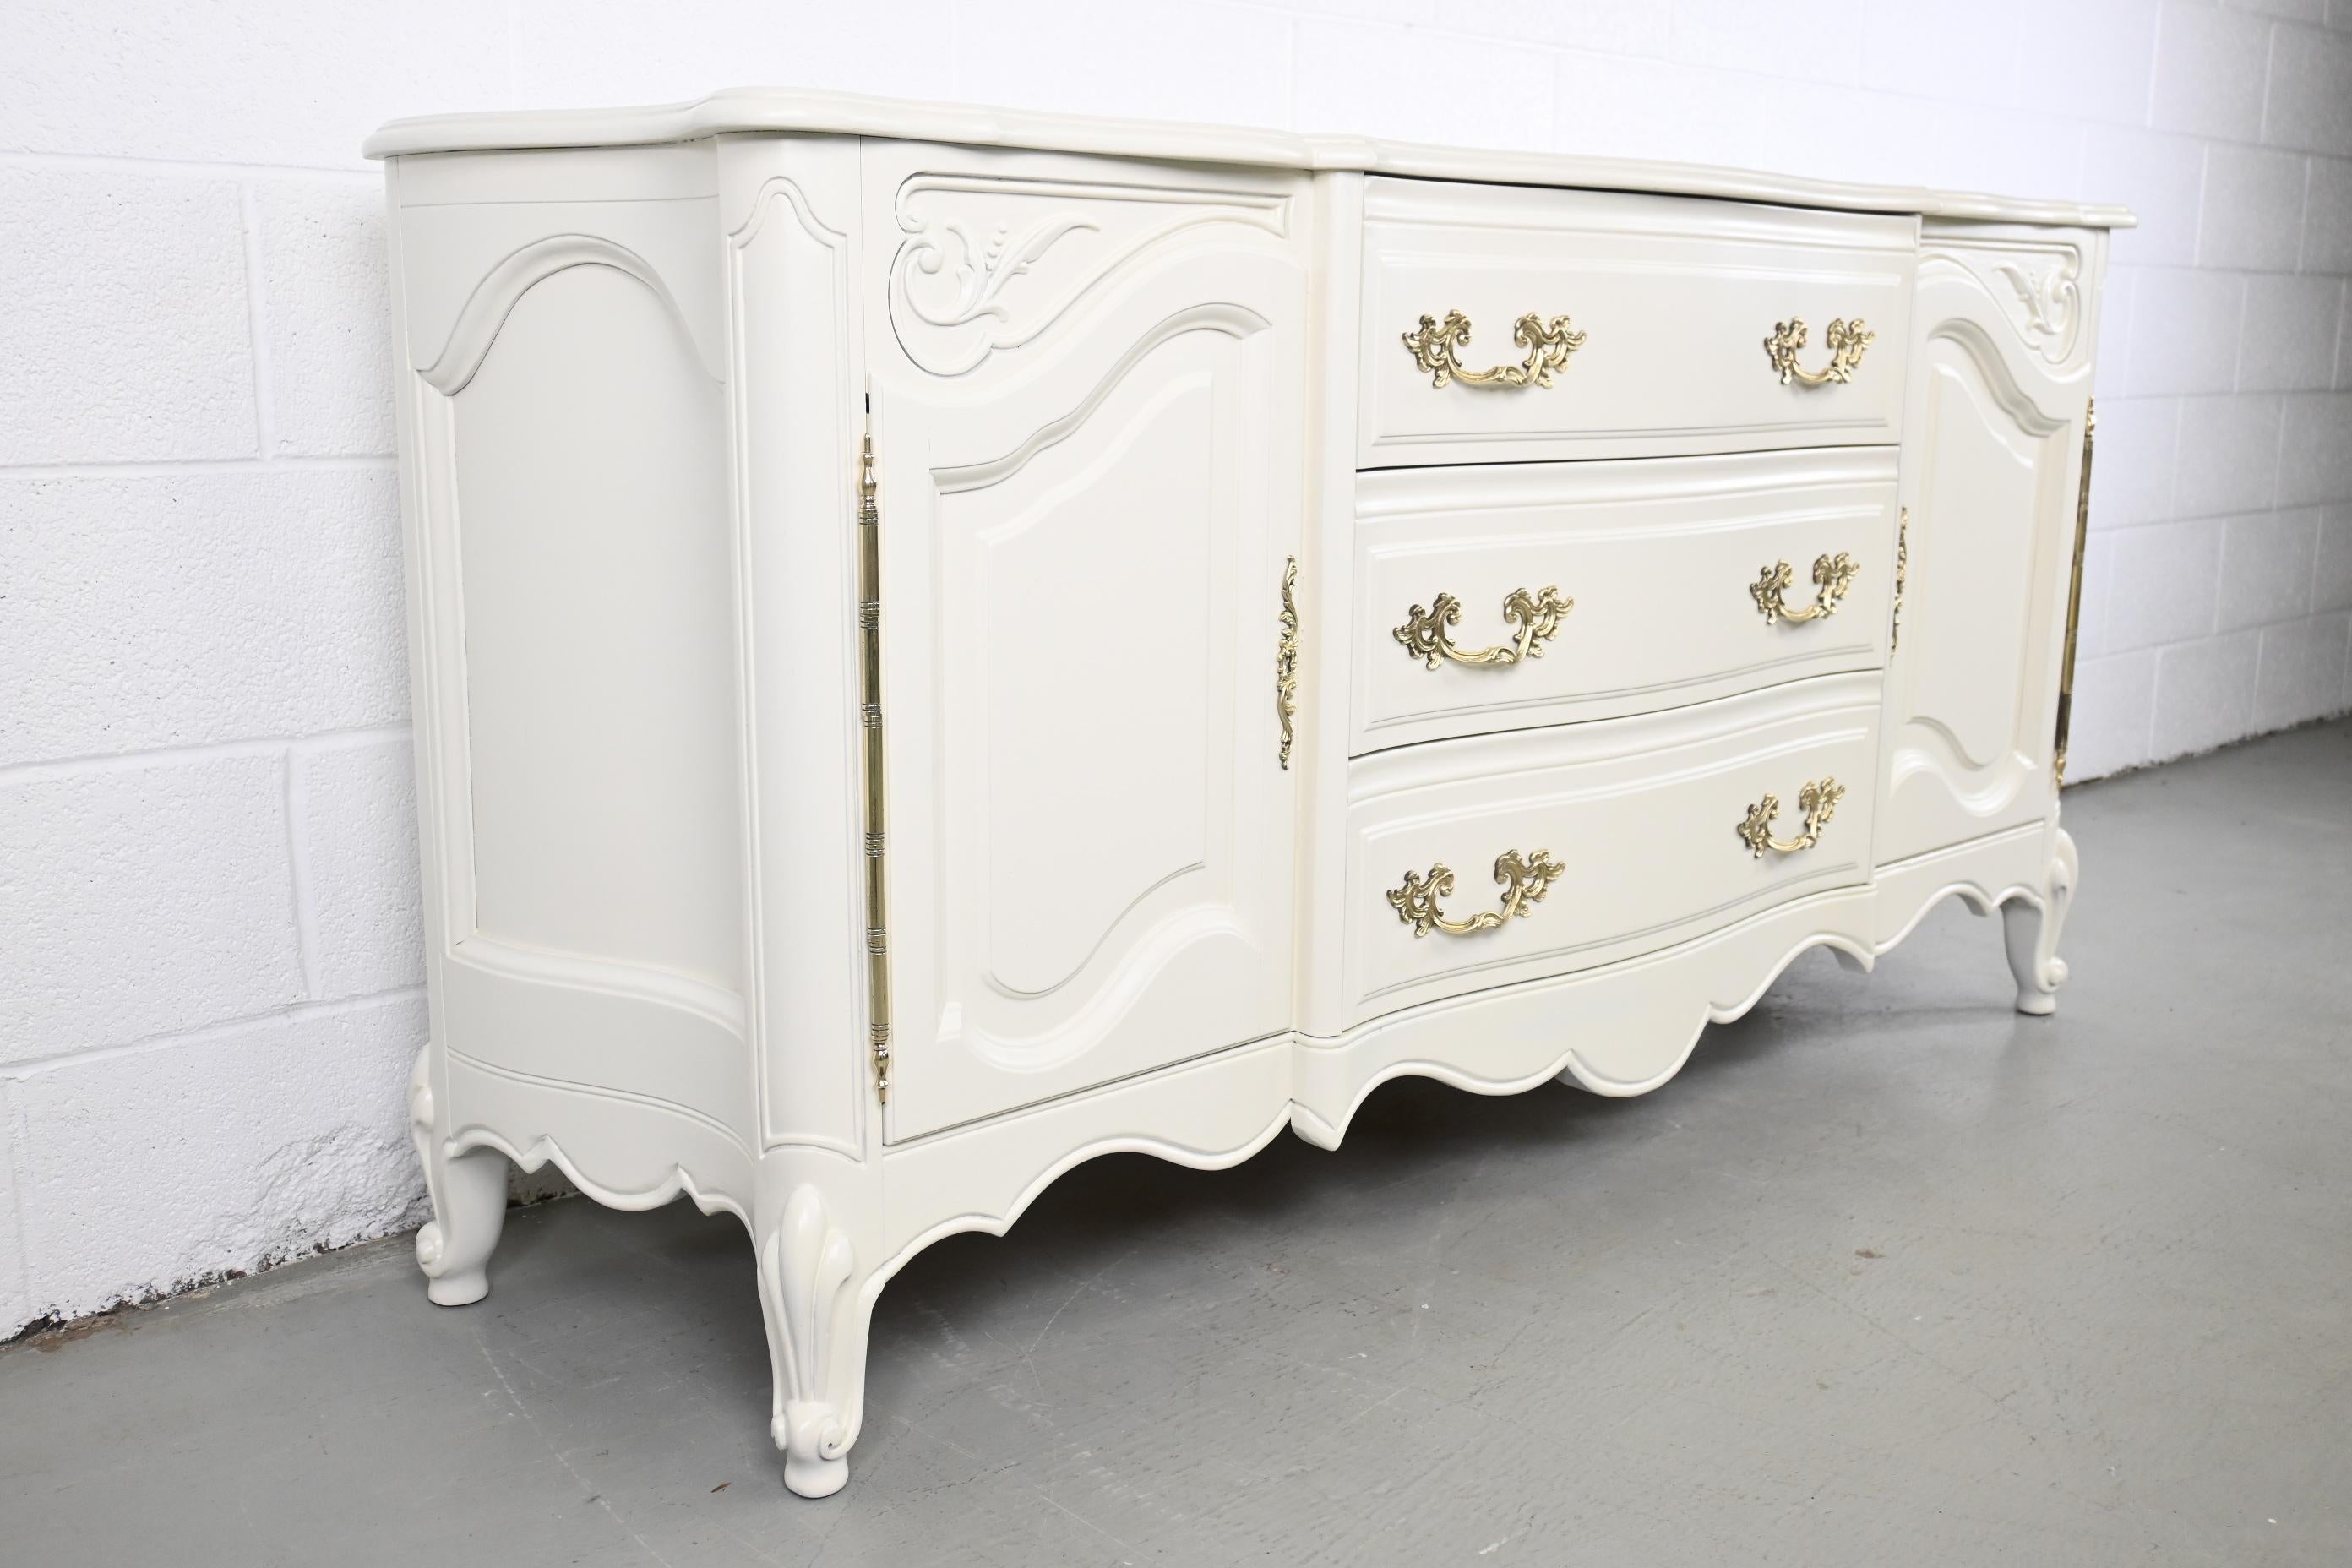 Karges Furniture Louis XV Style French Provincial Ivory Credenza or Sideboard

Karges Furniture, USA, 1980s

Measures: 66.5 Wide x 18.75 Deep x 32.88 High

Louis XV Style French Provincial ivory lacquered credenza with carved details and brass